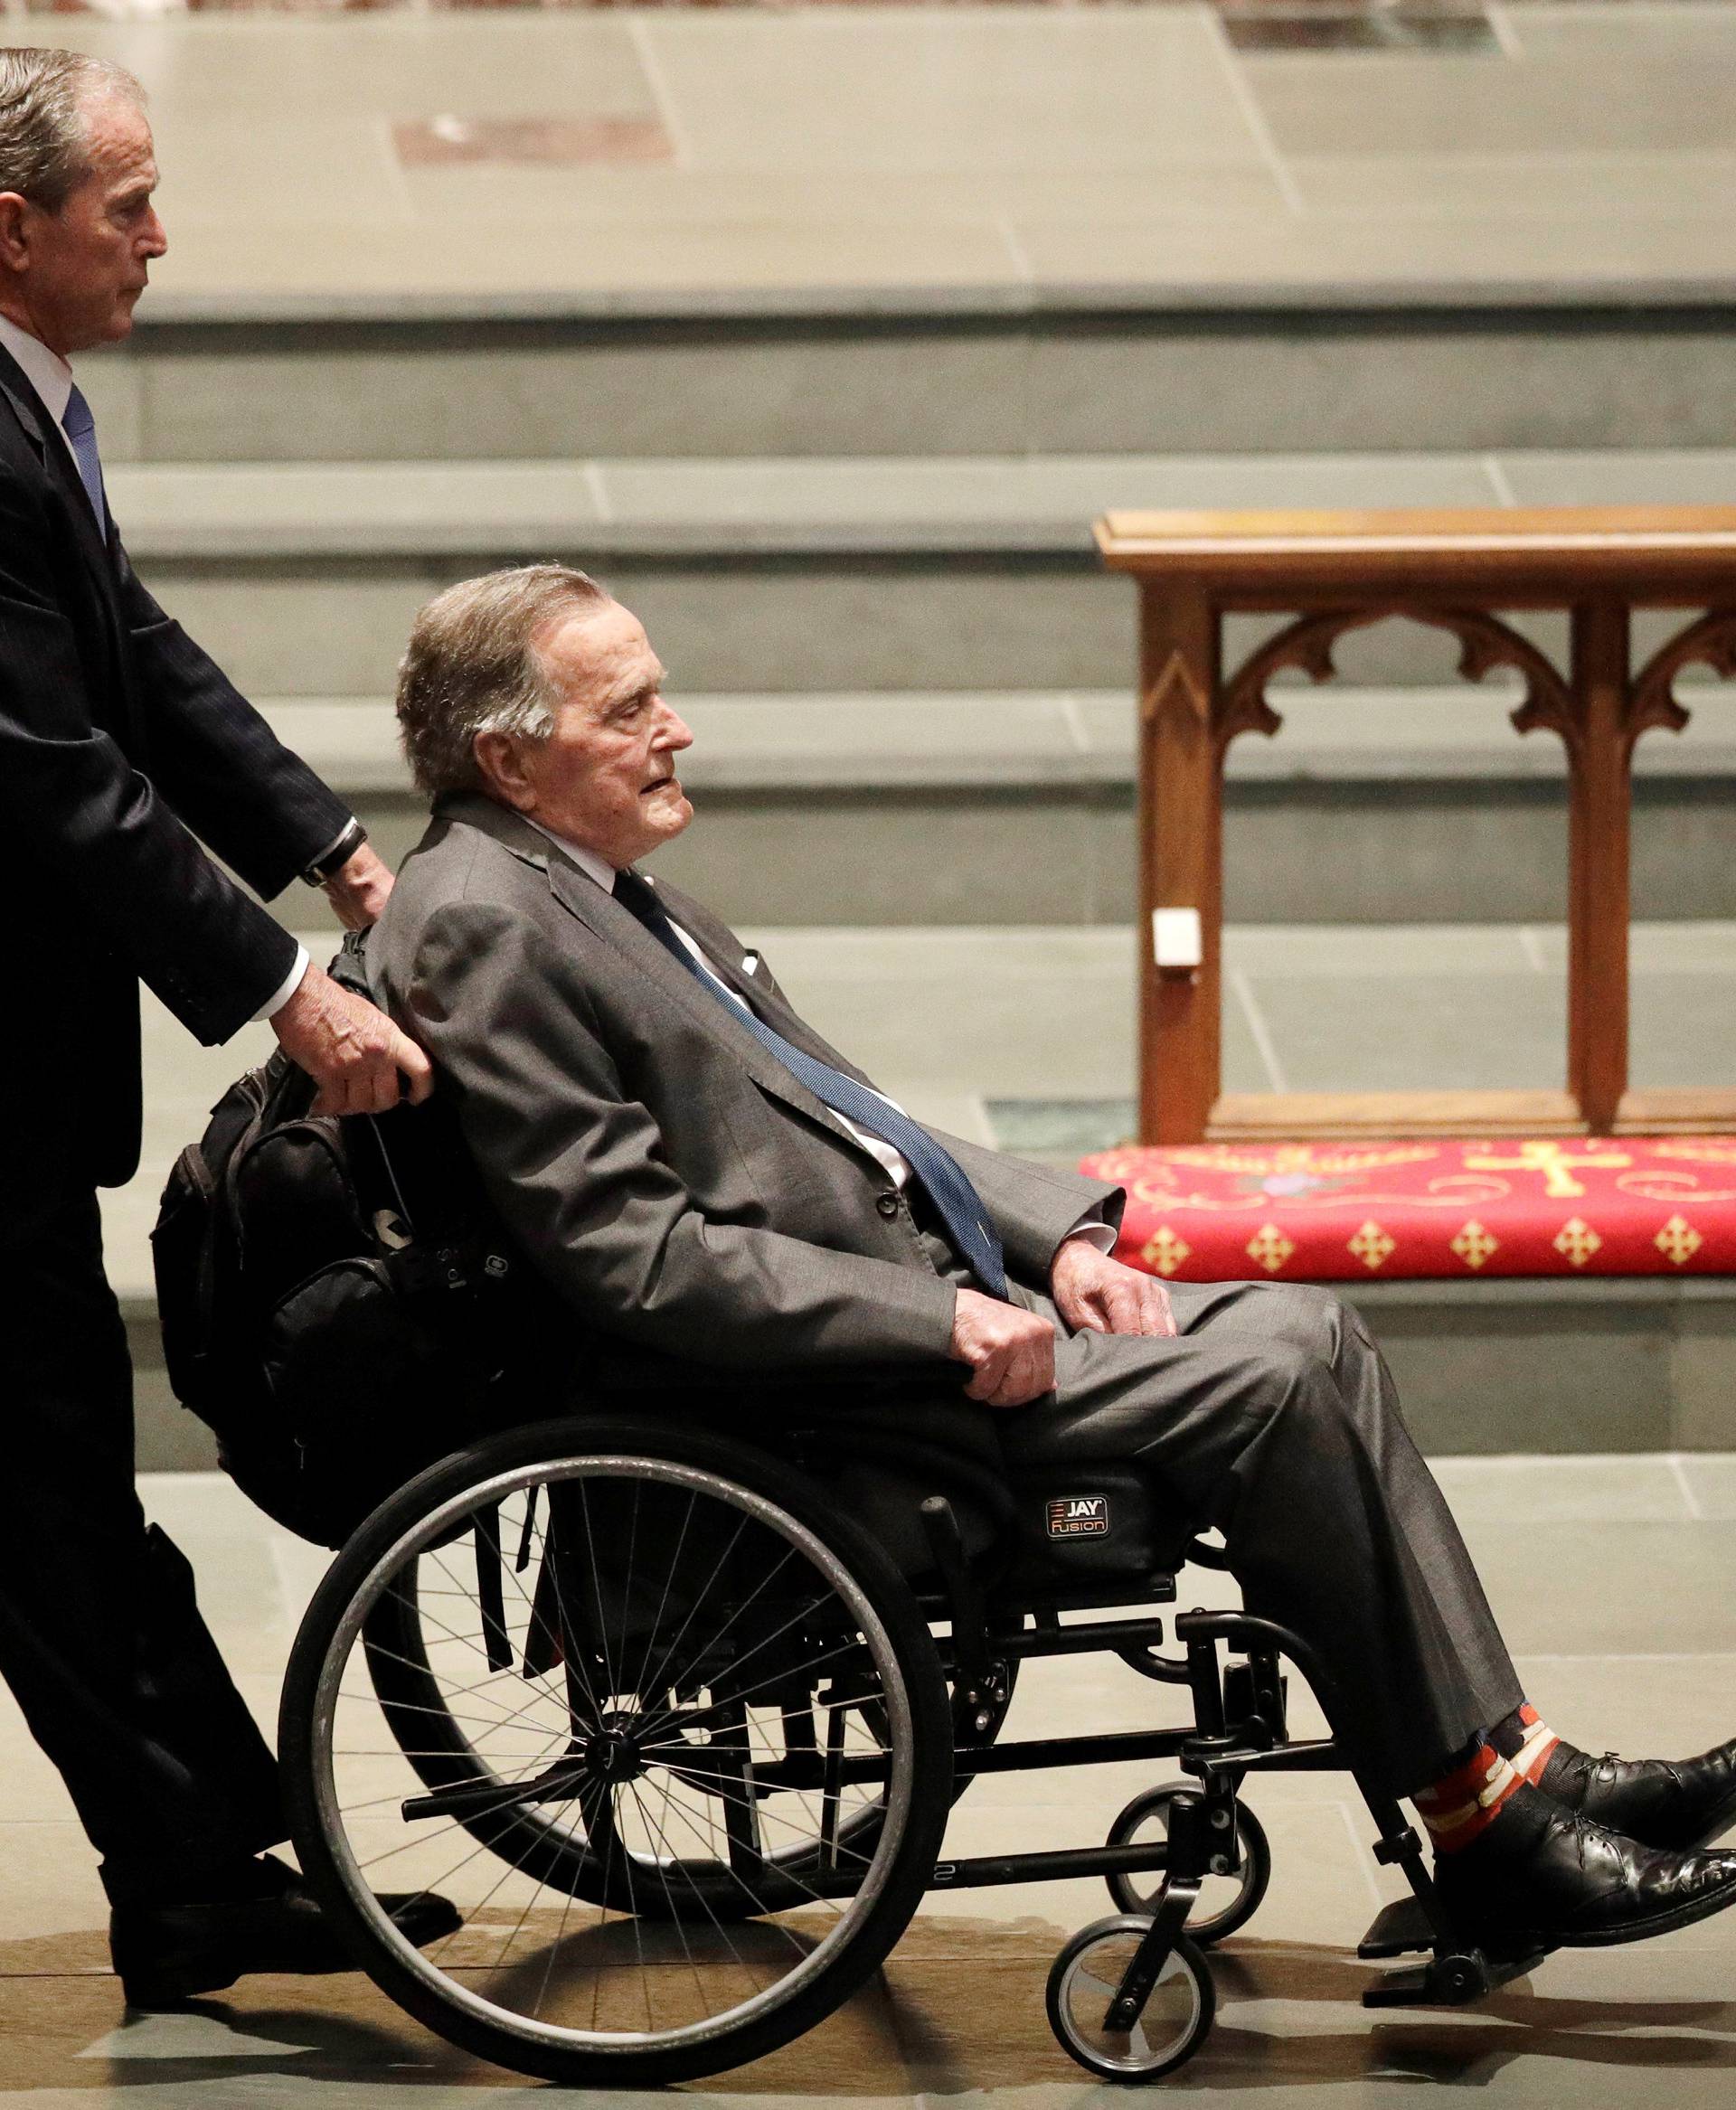 Former Presidents George W. Bush, and George H.W. Bush arrive at St. Martin's Episcopal Church for funeral services for former first lady Barbara Bush in Houston